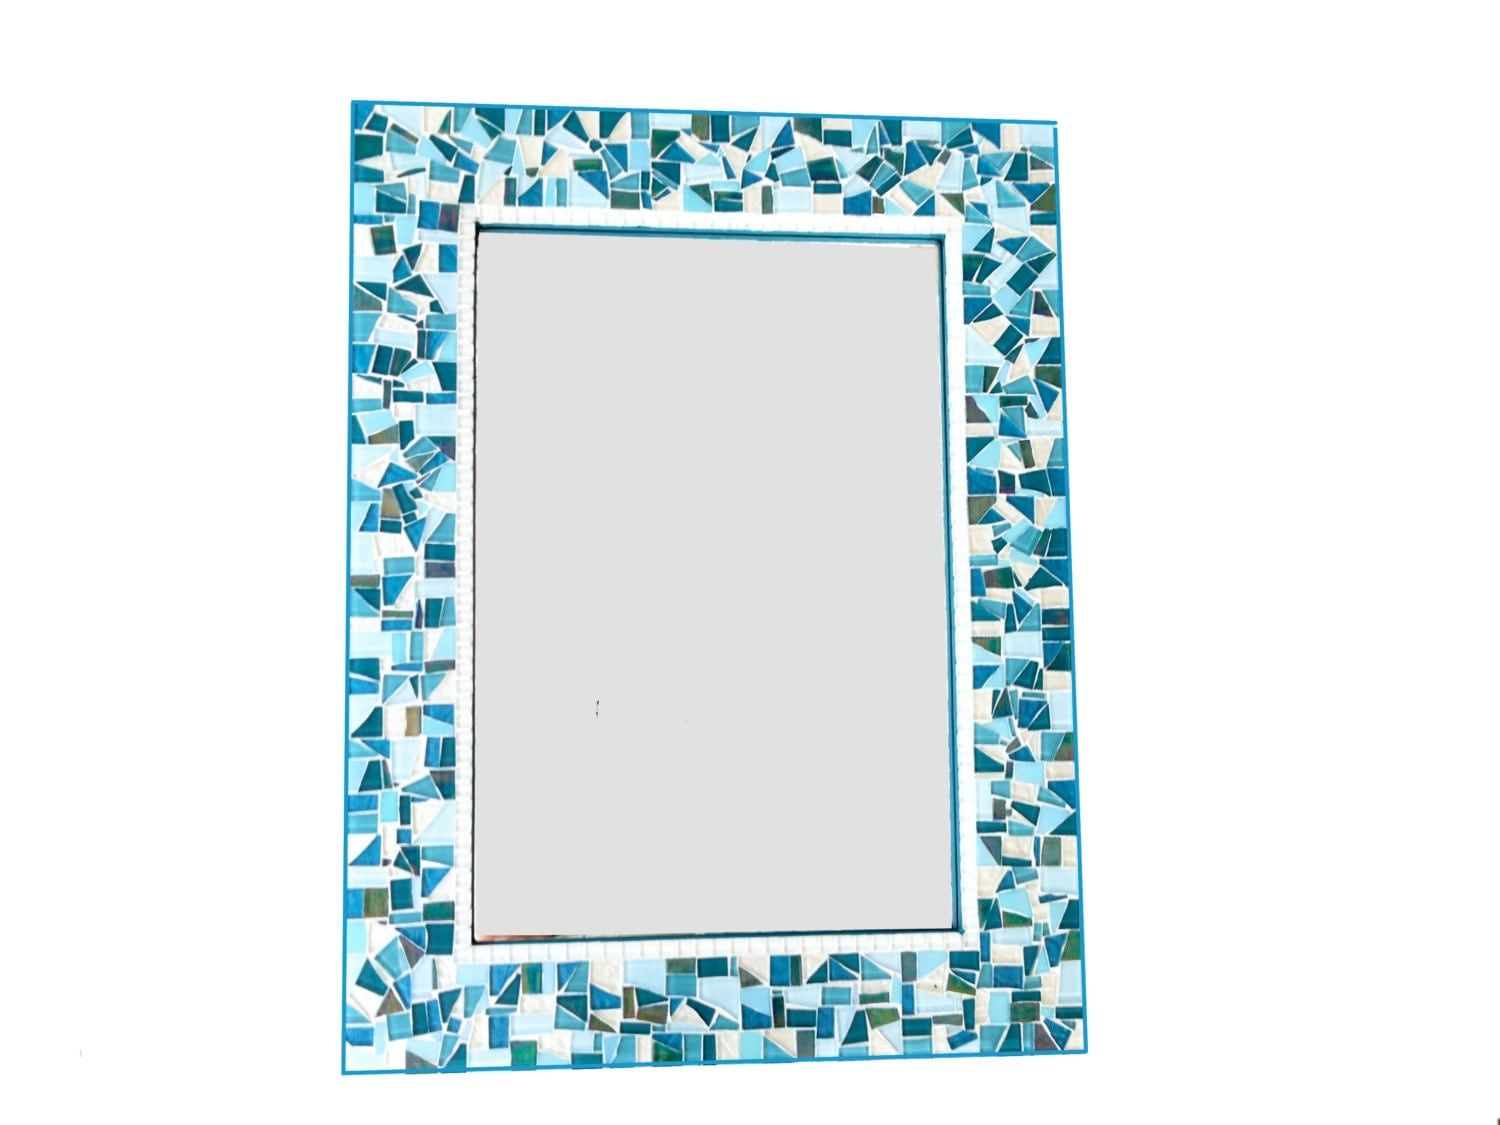 Turquoise Teal And Blue Large Mosaic Wall Mirror Throughout Blue Green Wall Mirrors (View 9 of 15)